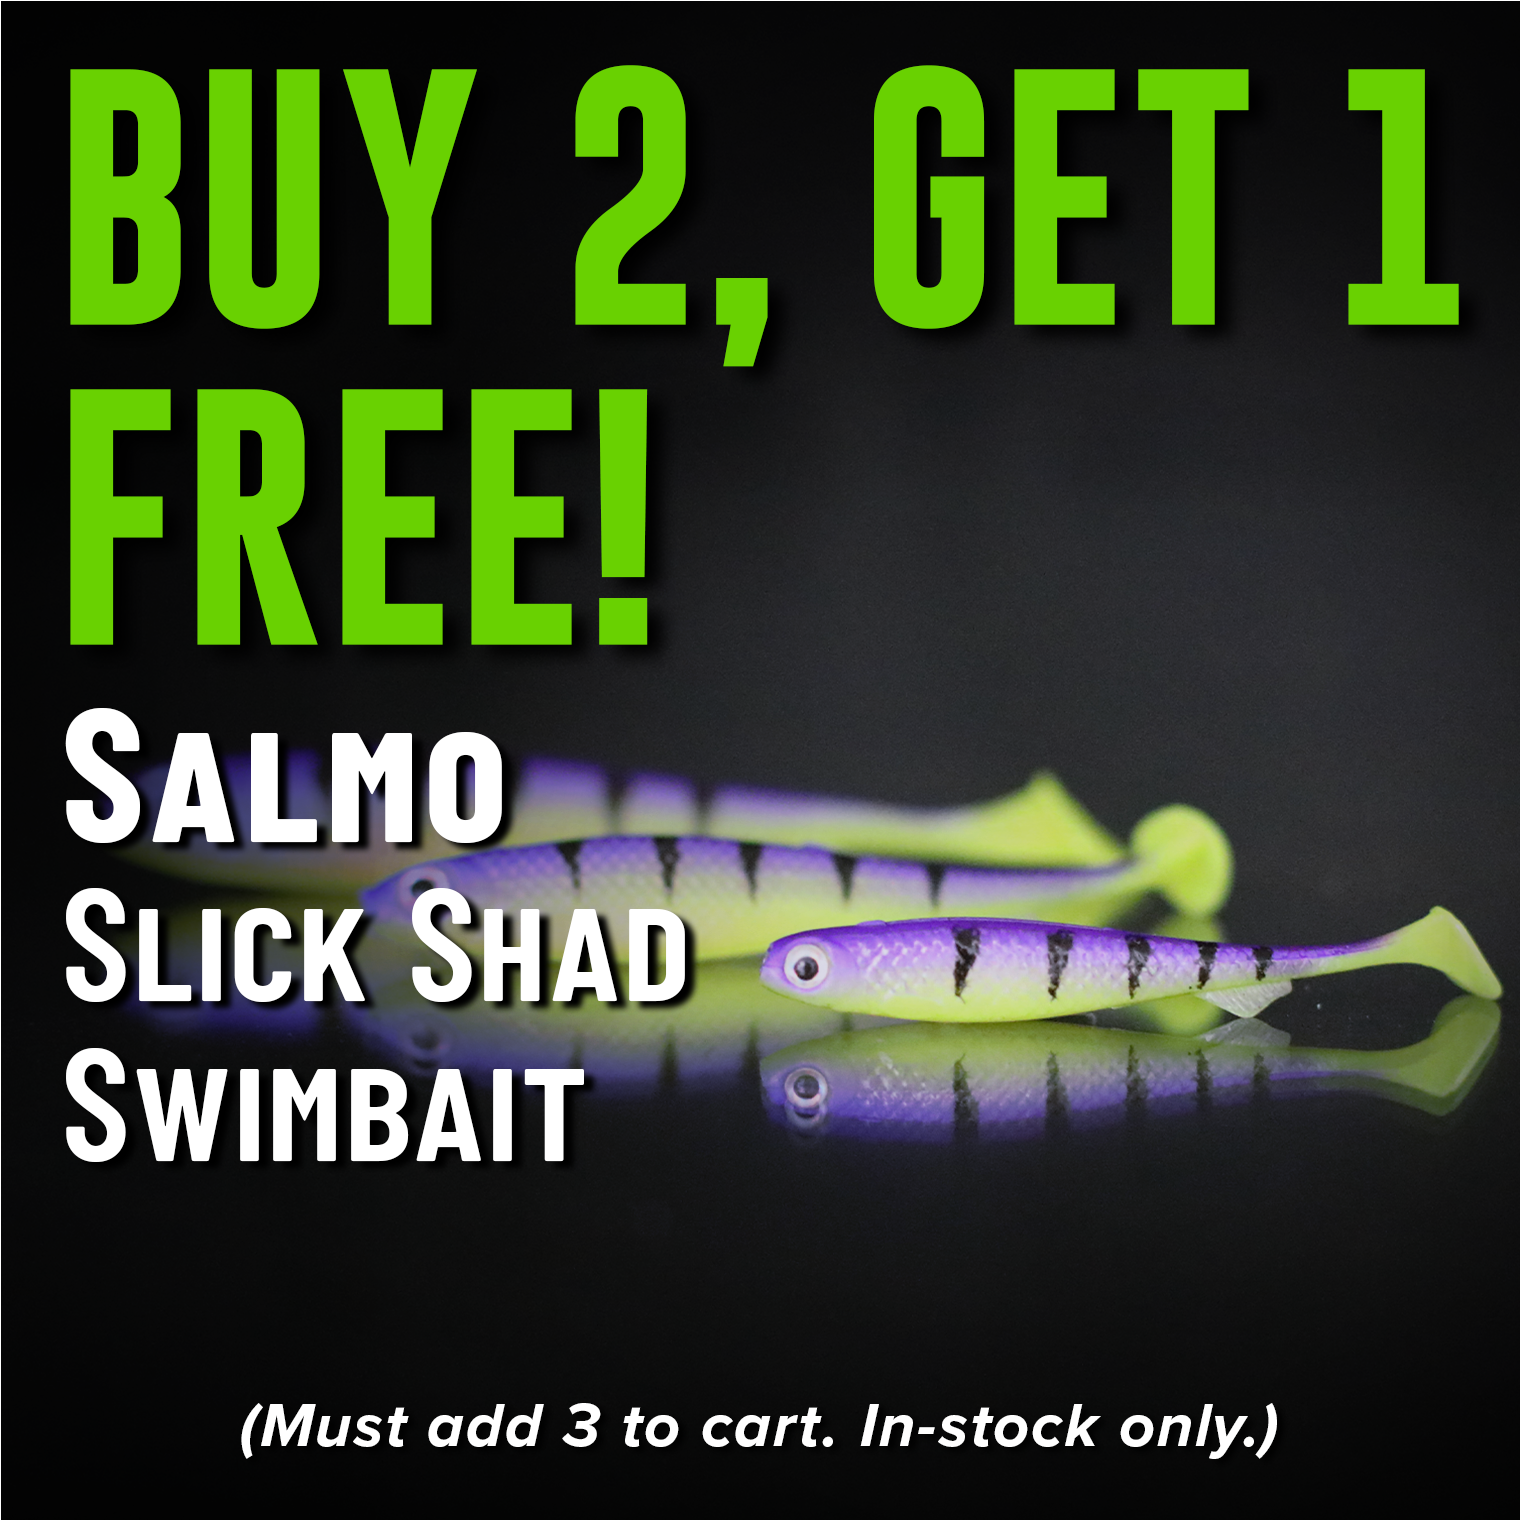 Buy 2, Get 1 Free! Salmo Slick Shad Swimbait (Must add 3 to cart. In-stock only.)